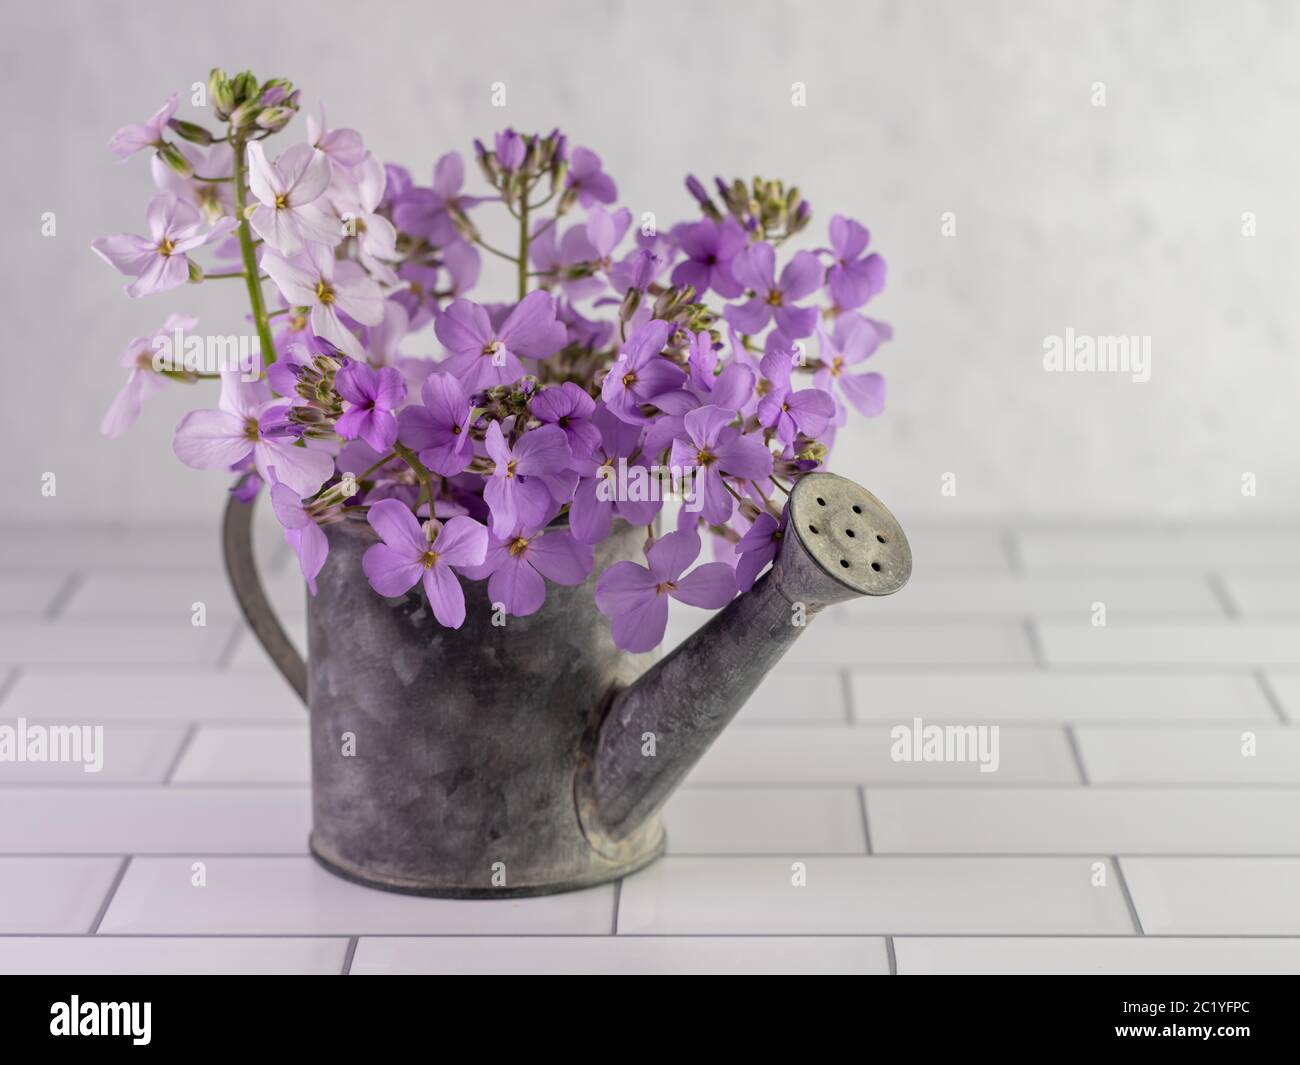 Rustic metal watering can filled with purple wildflowers called Dame’s Rocket, indoors for still life photography on a white subway tile surface with Stock Photo